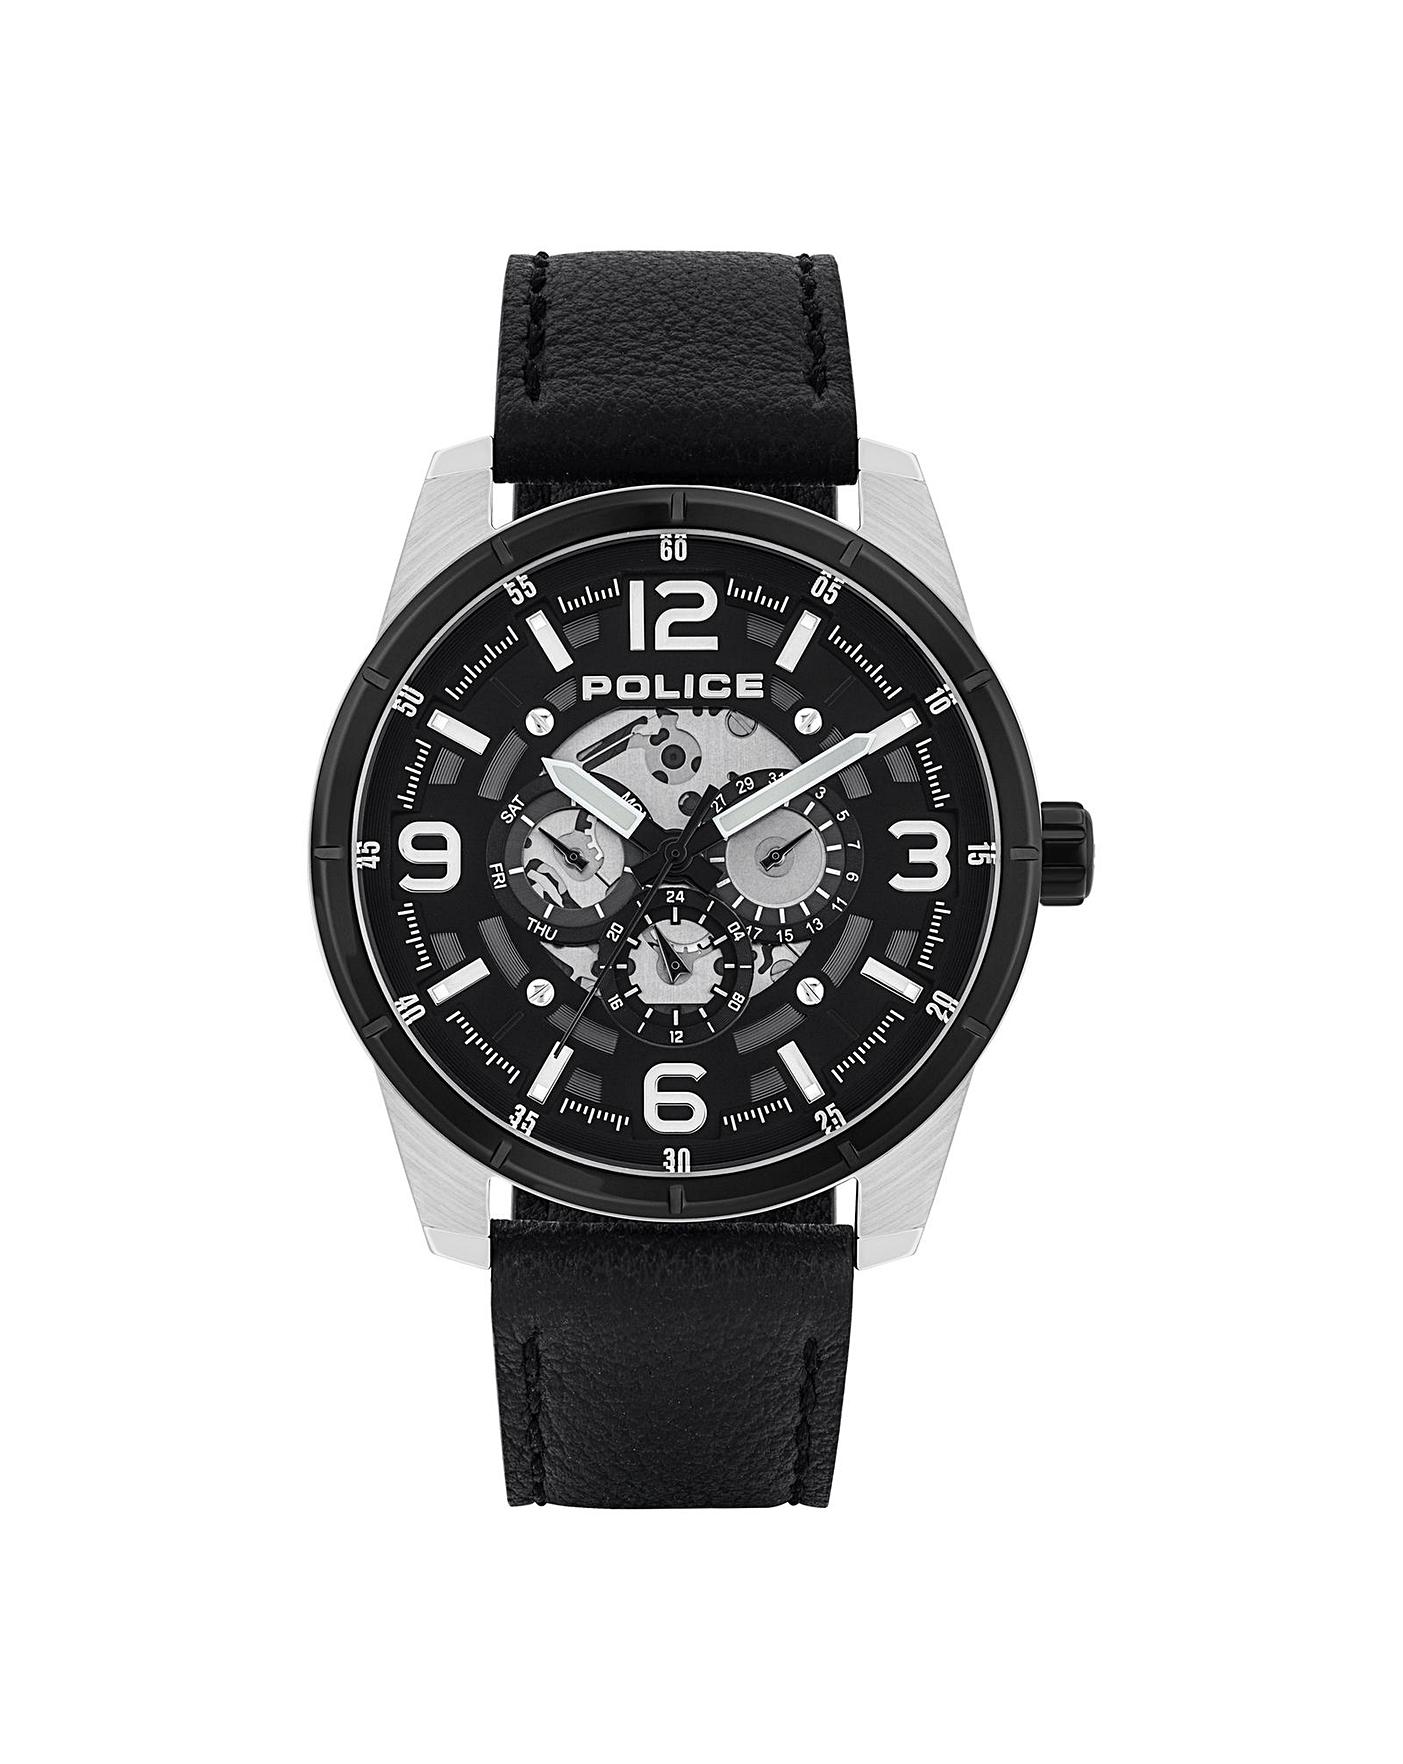 Gents Police Watch | J D Williams